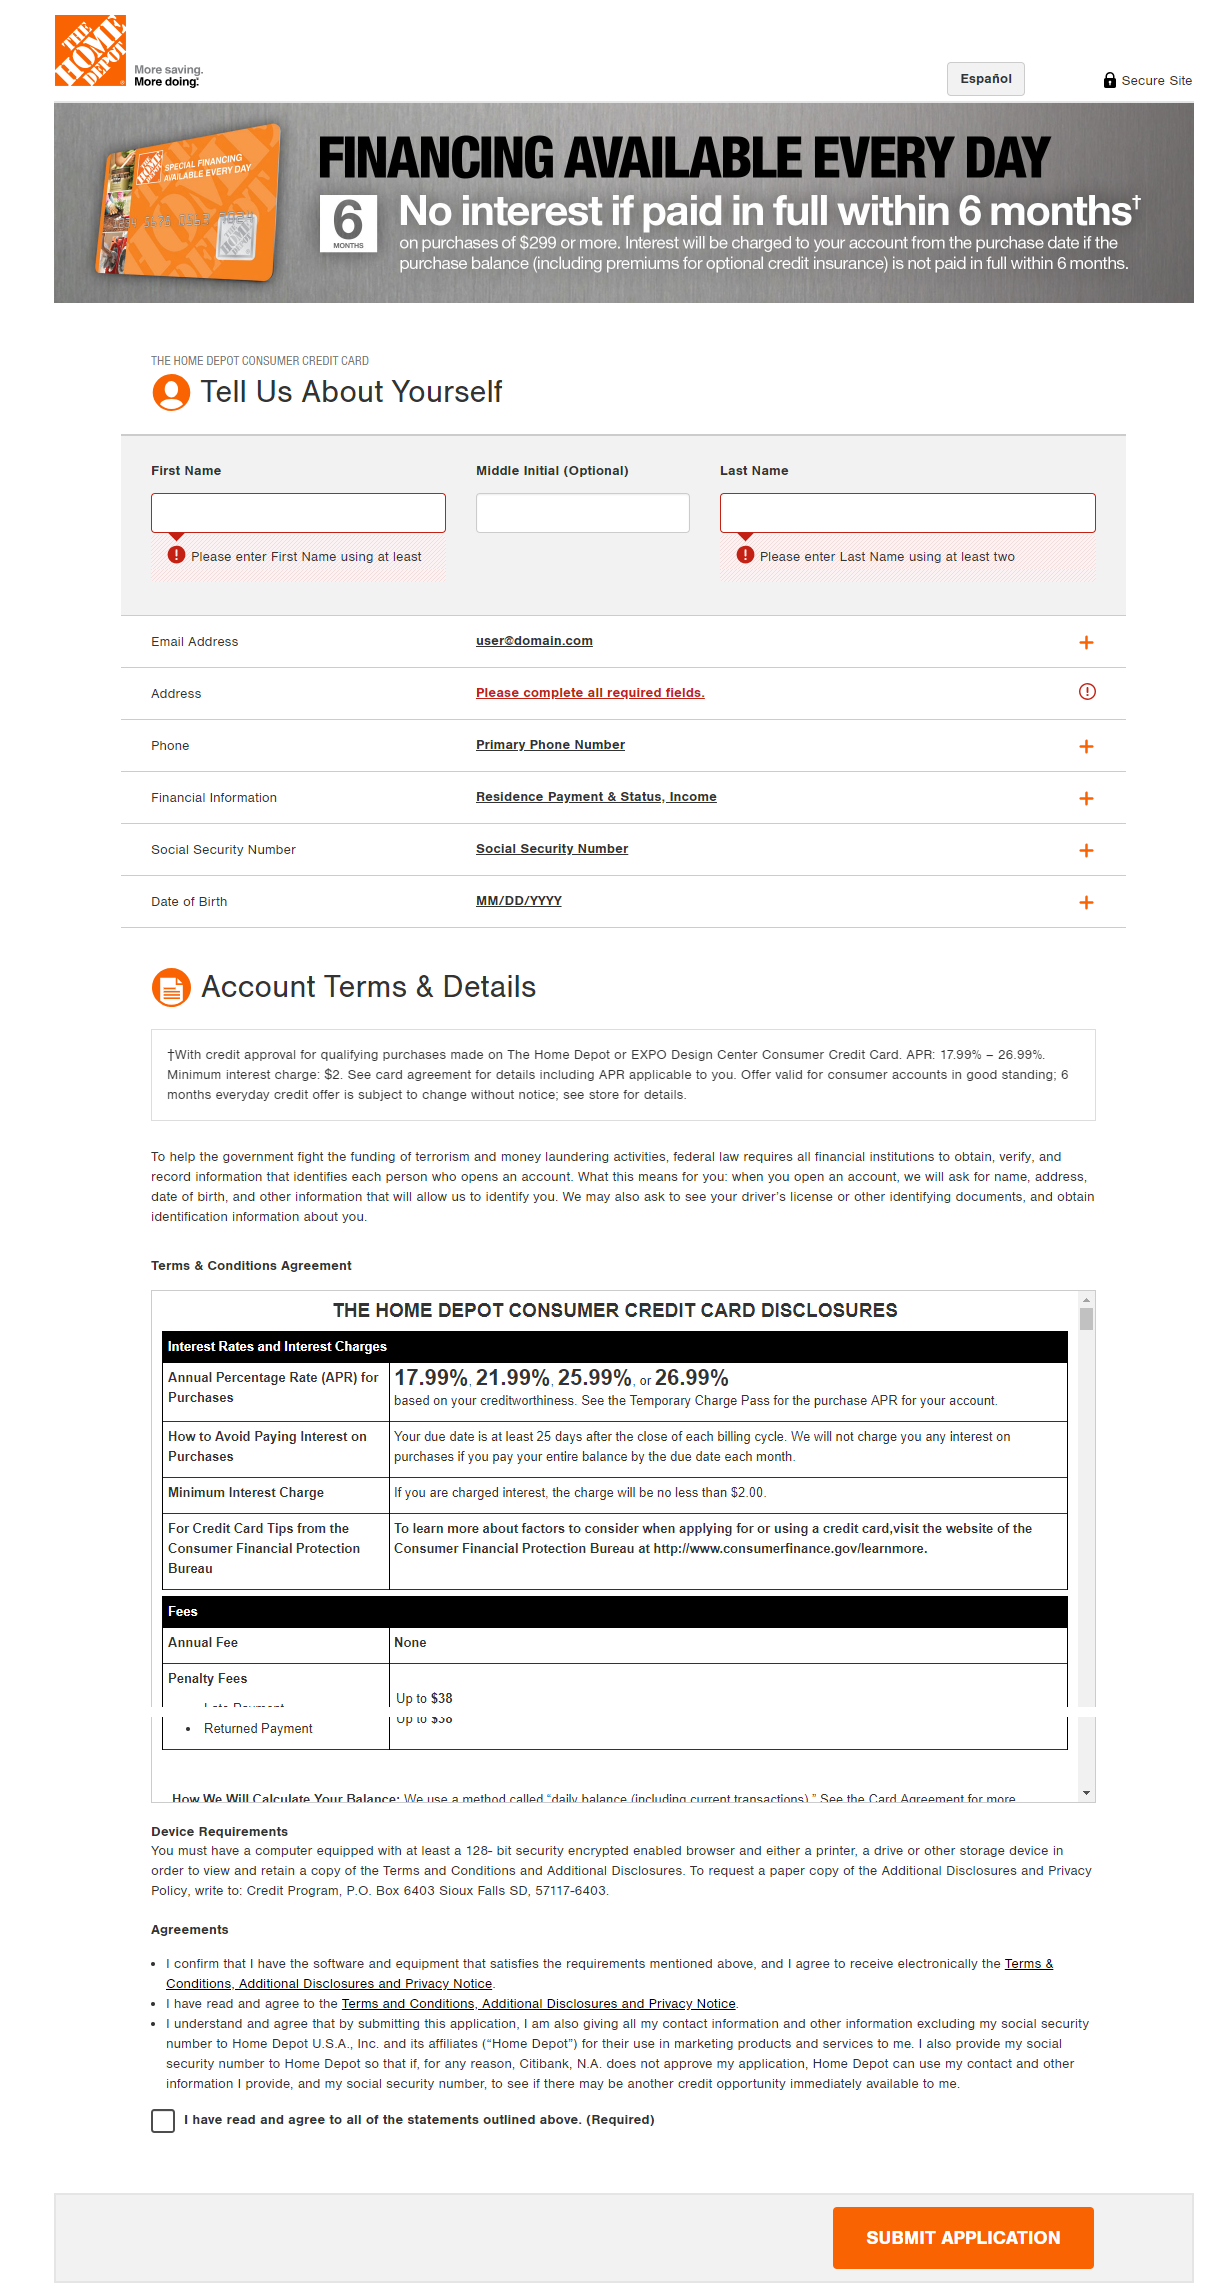 The Home Depot Consumer Credit Card Application Form